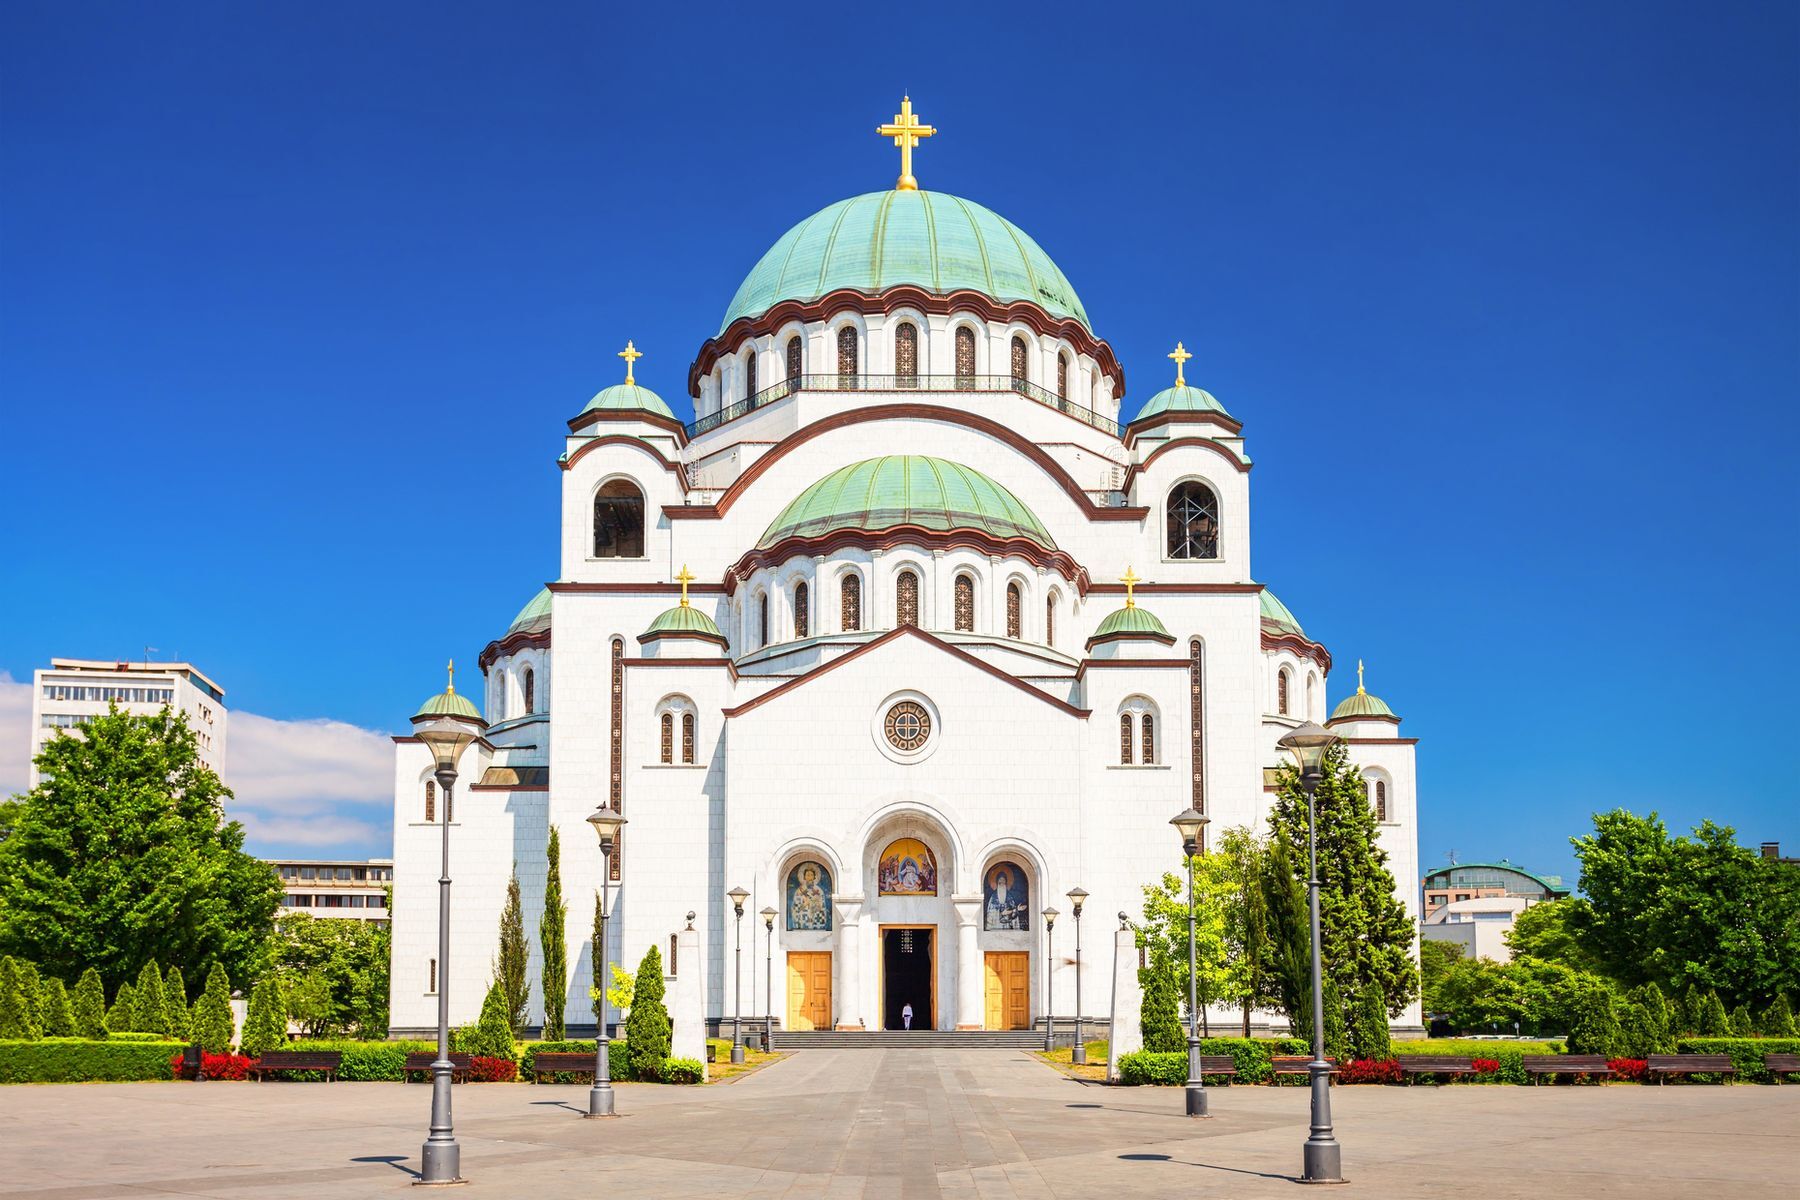 <p>Serbia’s capital, Belgrade, is another affordable destination to visit in 2024. Transportation, restaurants, bars, and other everyday expenses are, on average, <a href="https://www.serbia.travel/en" rel="noreferrer noopener">50%</a> <a href="https://www.serbia.travel/en" rel="noreferrer noopener">less</a> <a href="https://www.serbia.travel/en" rel="noreferrer noopener">expensive</a> in this country than elsewhere in Europe. A <a href="https://www.trip.com/travel-guide/attraction/belgrade/saint-sava-temple-18695234/" rel="noreferrer noopener">fr</a><a href="https://www.trip.com/travel-guide/attraction/belgrade/saint-sava-temple-18695234/" rel="noreferrer noopener">e</a><a href="https://www.trip.com/travel-guide/attraction/belgrade/saint-sava-temple-18695234/" rel="noreferrer noopener">e</a> visit to Saint Sava Temple, for instance, is just one must-do Belgrade activity. Capable of welcoming <a href="https://orthodoxtimes.com/the-largest-temples-in-the-world-saint-sava-in-serbia/" rel="noreferrer noopener">10,000 worshippers</a>, it’s the <a href="https://www.vogue.com/article/saint-sava-temple-belgrade-serbia" rel="noreferrer noopener">second-largest Orthodox Christian church in the world</a>. Be sure to admire its central cupola’s impressive mosaic. To learn even more about Serbian culture, view 23 collections housed in the Historical Museum of Serbia for <a href="https://imus.org.rs/en/visitor-information/" rel="noreferrer noopener">less</a> <a href="https://imus.org.rs/en/visitor-information/" rel="noreferrer noopener">than</a> <a href="https://imus.org.rs/en/visitor-information/" rel="noreferrer noopener">400</a> <a href="https://imus.org.rs/en/visitor-information/" rel="noreferrer noopener">Serbian</a> <a href="https://imus.org.rs/en/visitor-information/" rel="noreferrer noopener">dinars</a> (<a href="https://exchangerate.guru/rsd/usd/400/" rel="noreferrer noopener">US$4</a>) per person. You’ll also enjoy a stroll through the city and the chance to explore local businesses.</p>